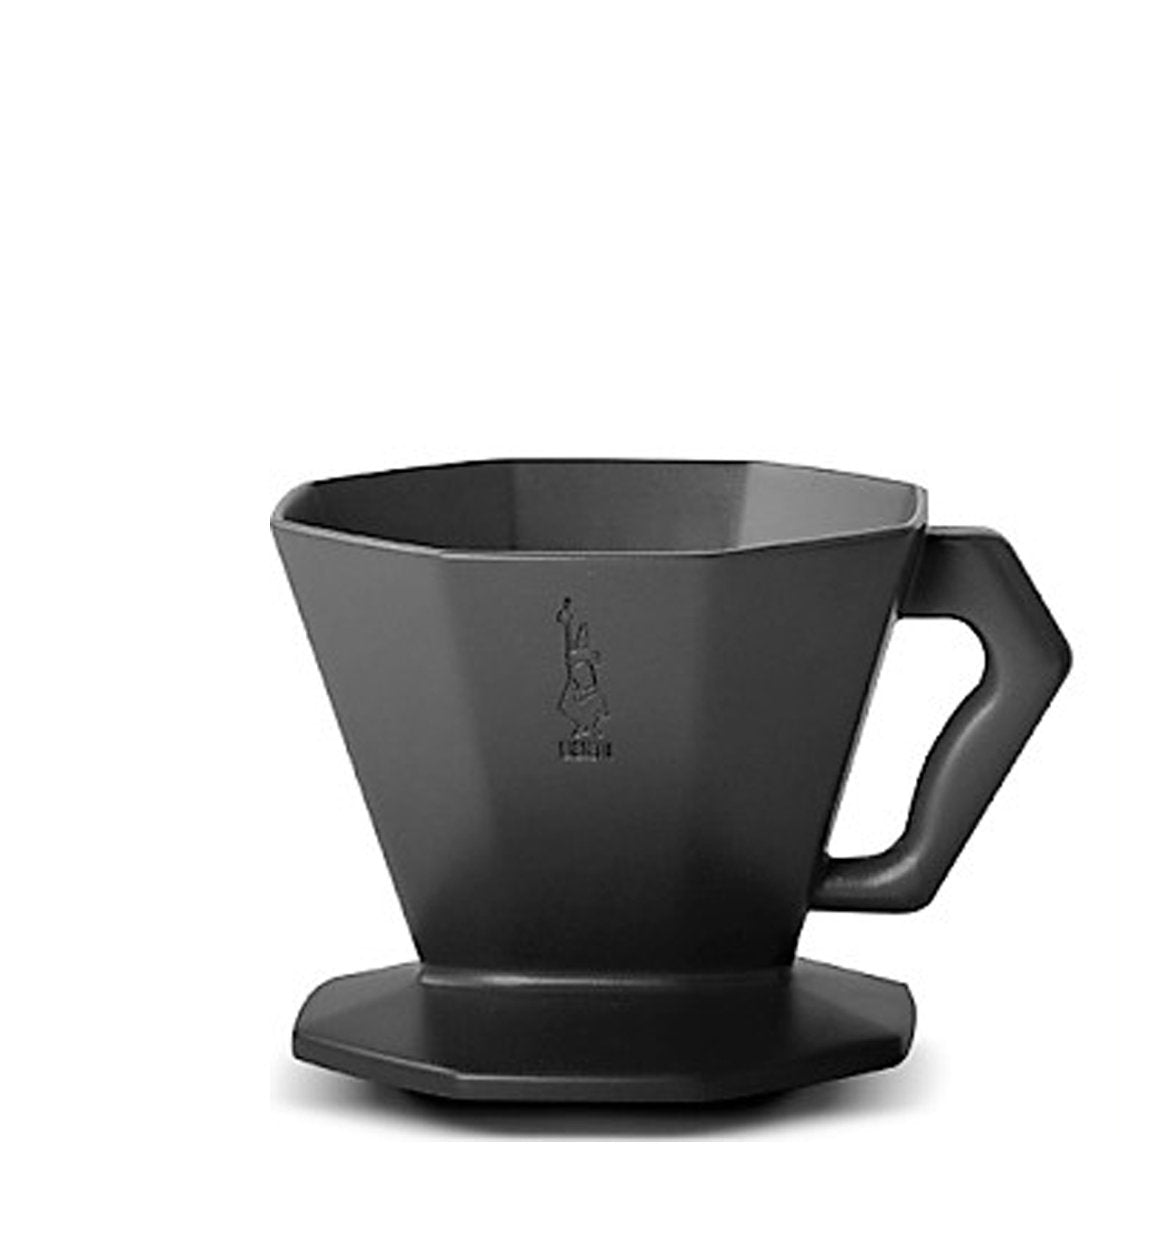 Pour Over Bialetti - V60